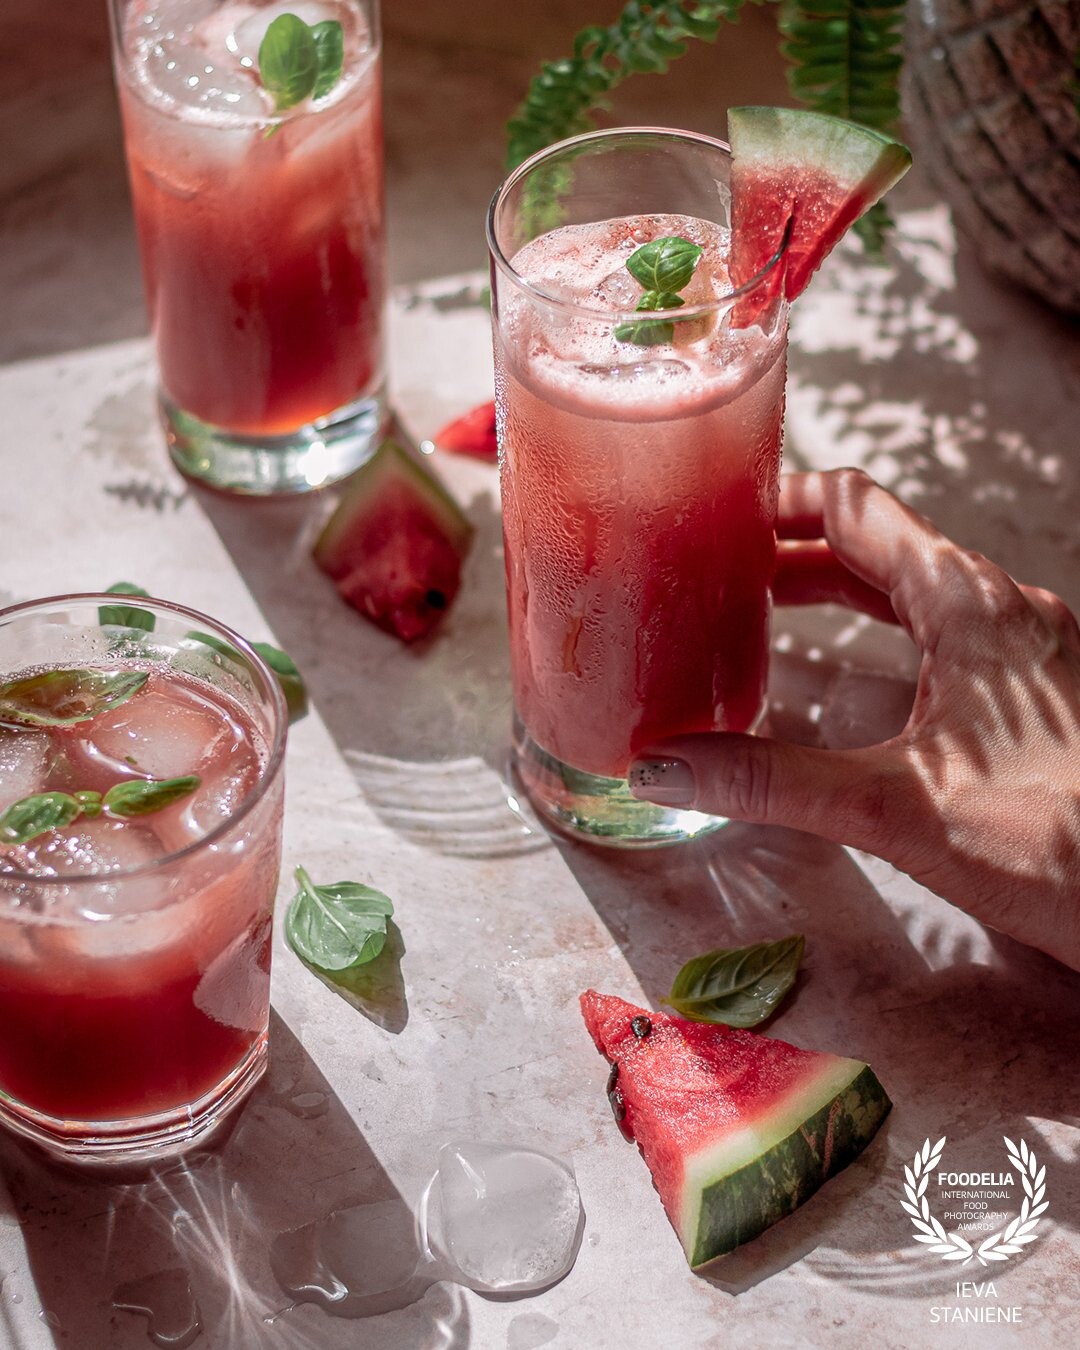 This shot was all about bringing those summer vibes with color contrast, exciting highlights and shadows, melting ice and summery watermelon & basil taste. I’ve captured it with natural light.